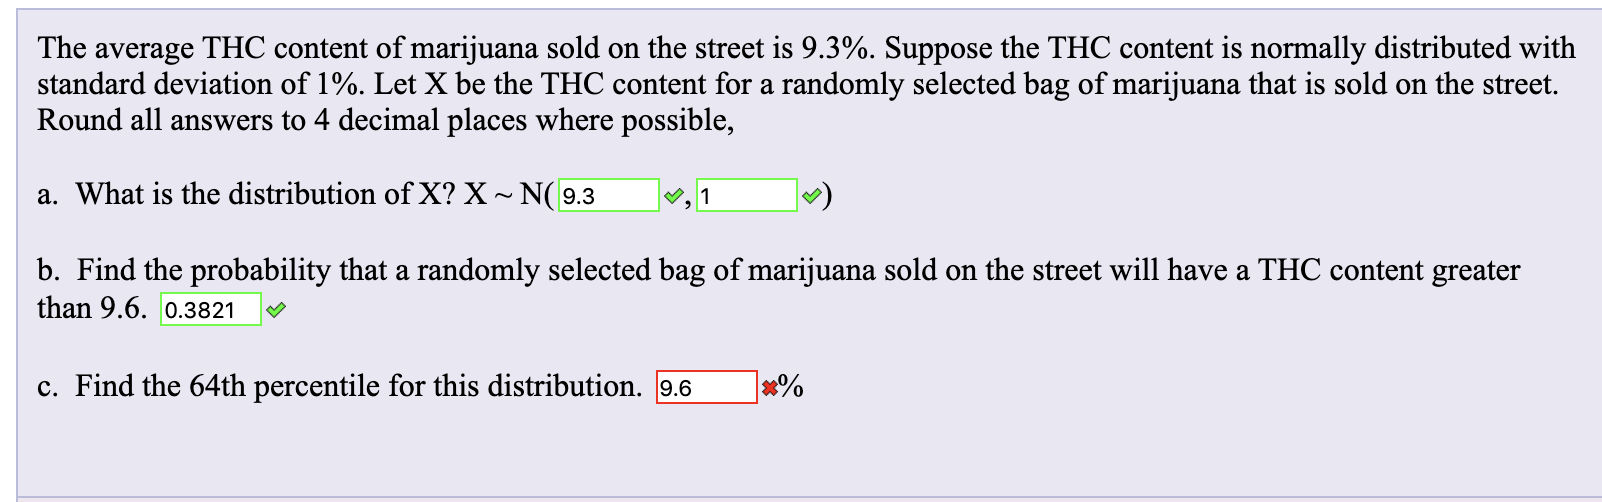 The average THC content of marijuana sold on the street is 9.3%. Suppose the THC content is normally distributed with
standard deviation of 1%. Let X be the THC content for a randomly selected bag of marijuana that is sold on the street.
Round all answers to 4 decimal places where possible,
a. What is the distribution of X? X ~ N(9.3
|, 1
b. Find the probability that a randomly selected bag of marijuana sold on the street will have a THC content greater
than 9.6. 0.3821
c. Find the 64th percentile for this distribution. 9.6
x%
